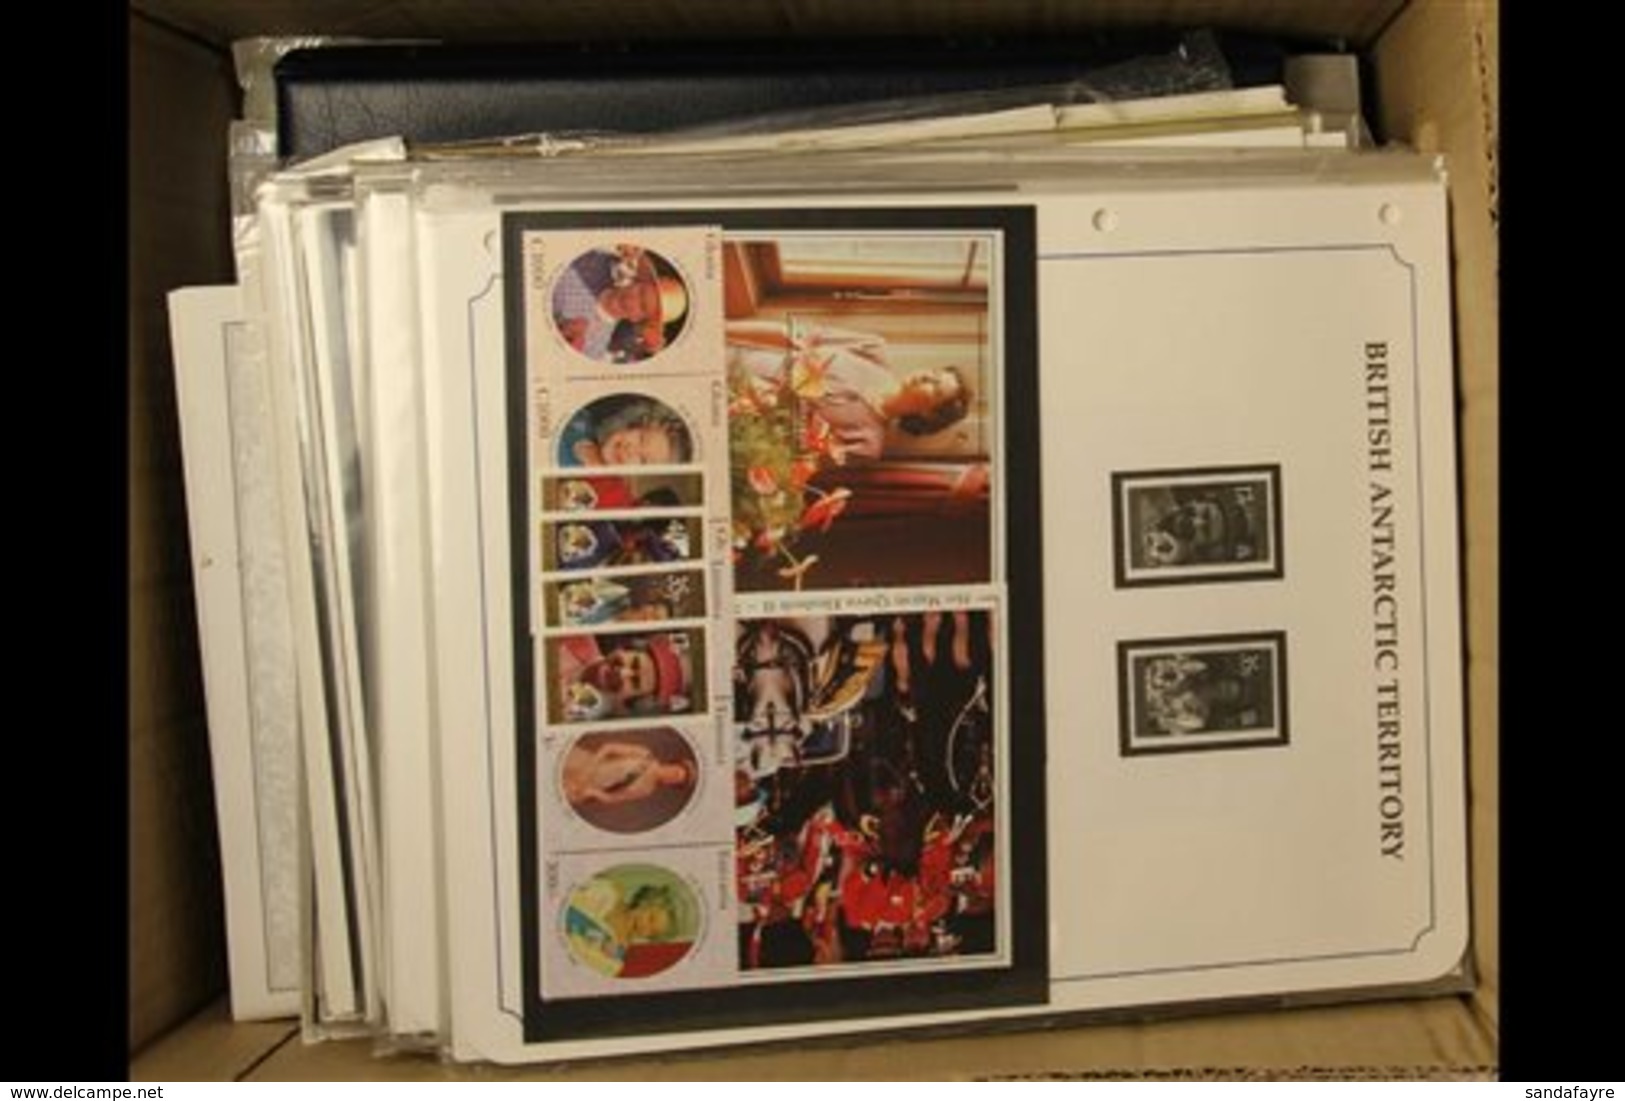 \Y ROYALTY\Y 1970s-2000s NEVER HINGED MINT SORTER BOX. An Unchecked, Unsorted Pile Of Albums, Stock Cards, Urch Harris S - Non Classés